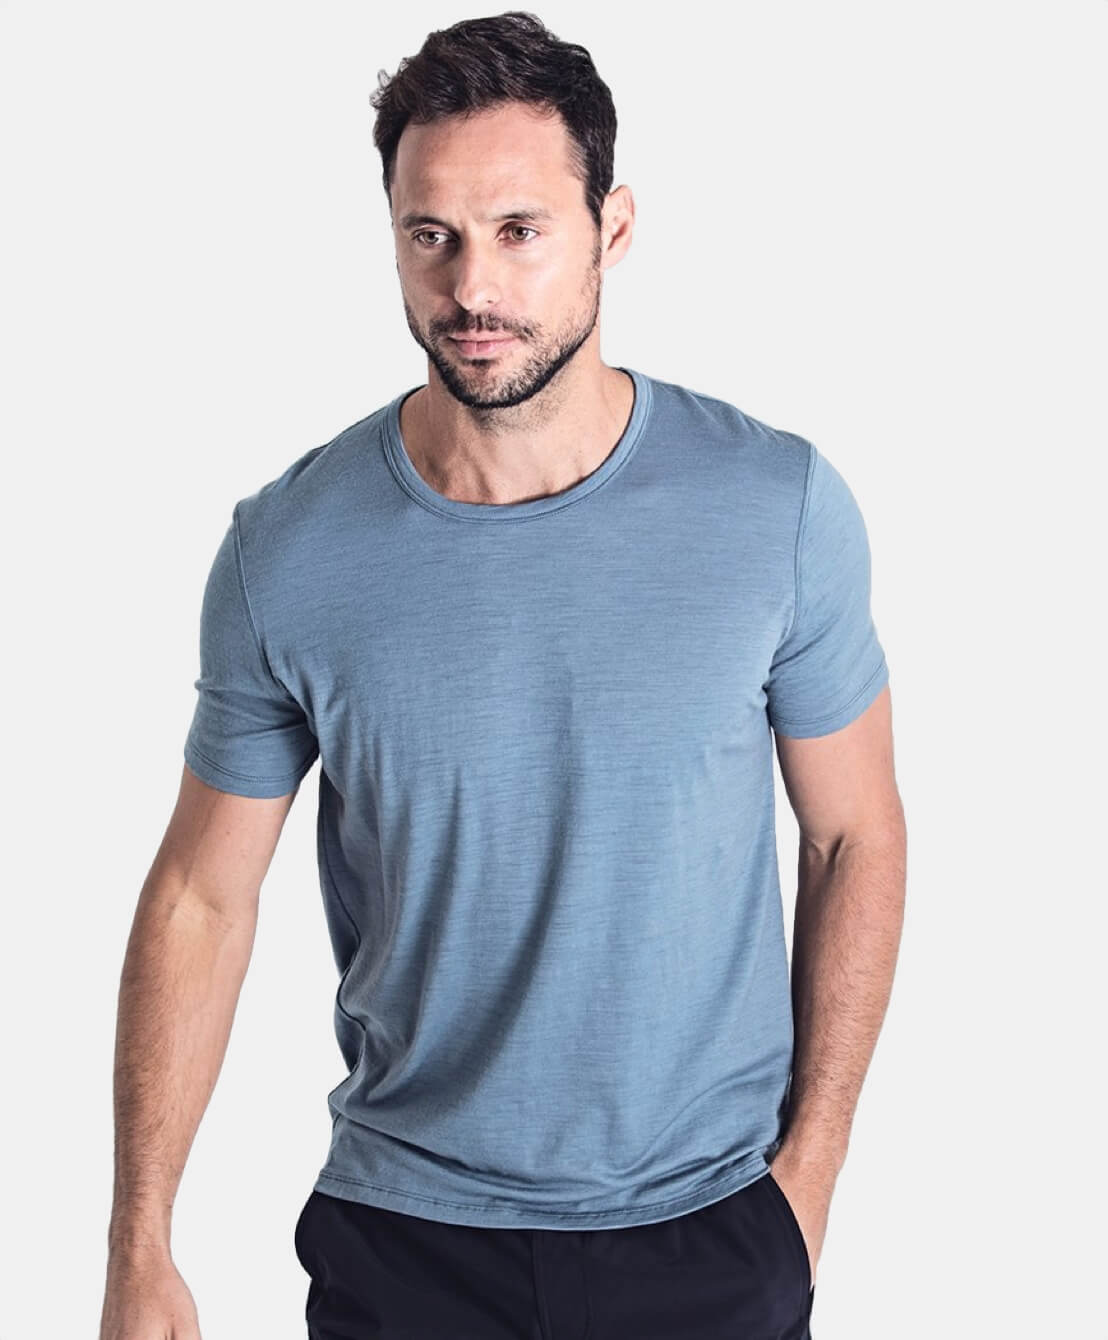 5 Best Workout Shirts for Men - For Sweating, Breathability ...